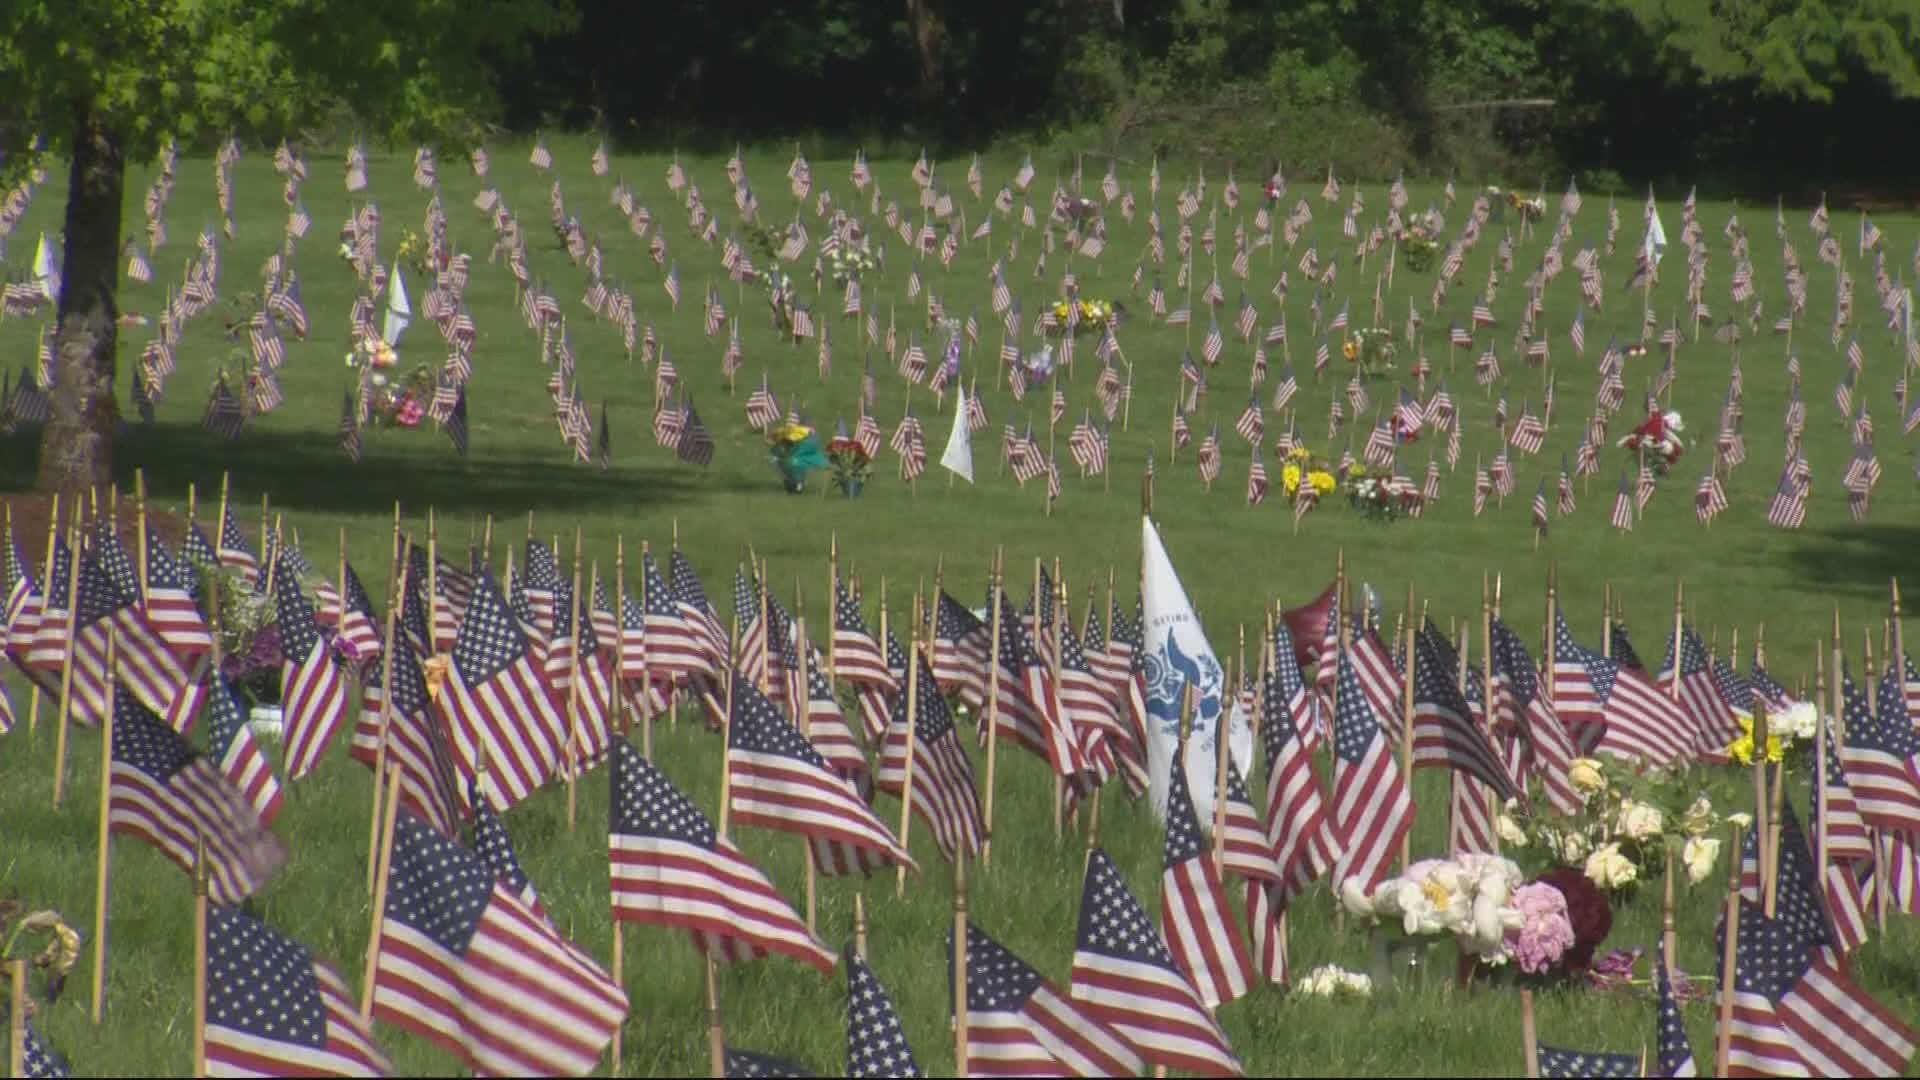 On Memorial Day, there was a steady stream of people visiting fallen heroes in the Willamette National Cemetery.